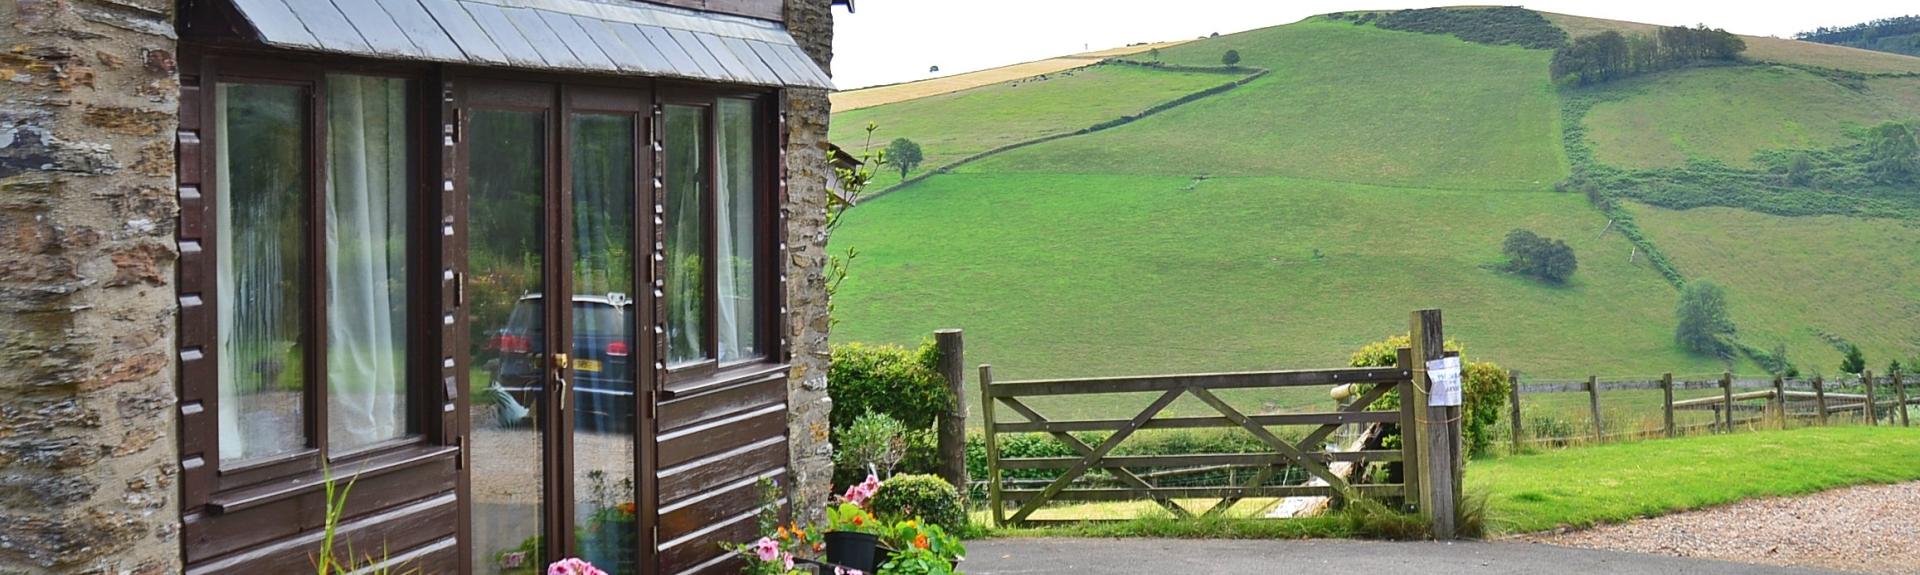 The gable-end of a country cottage surrounded by Exmoor's rolling hills.